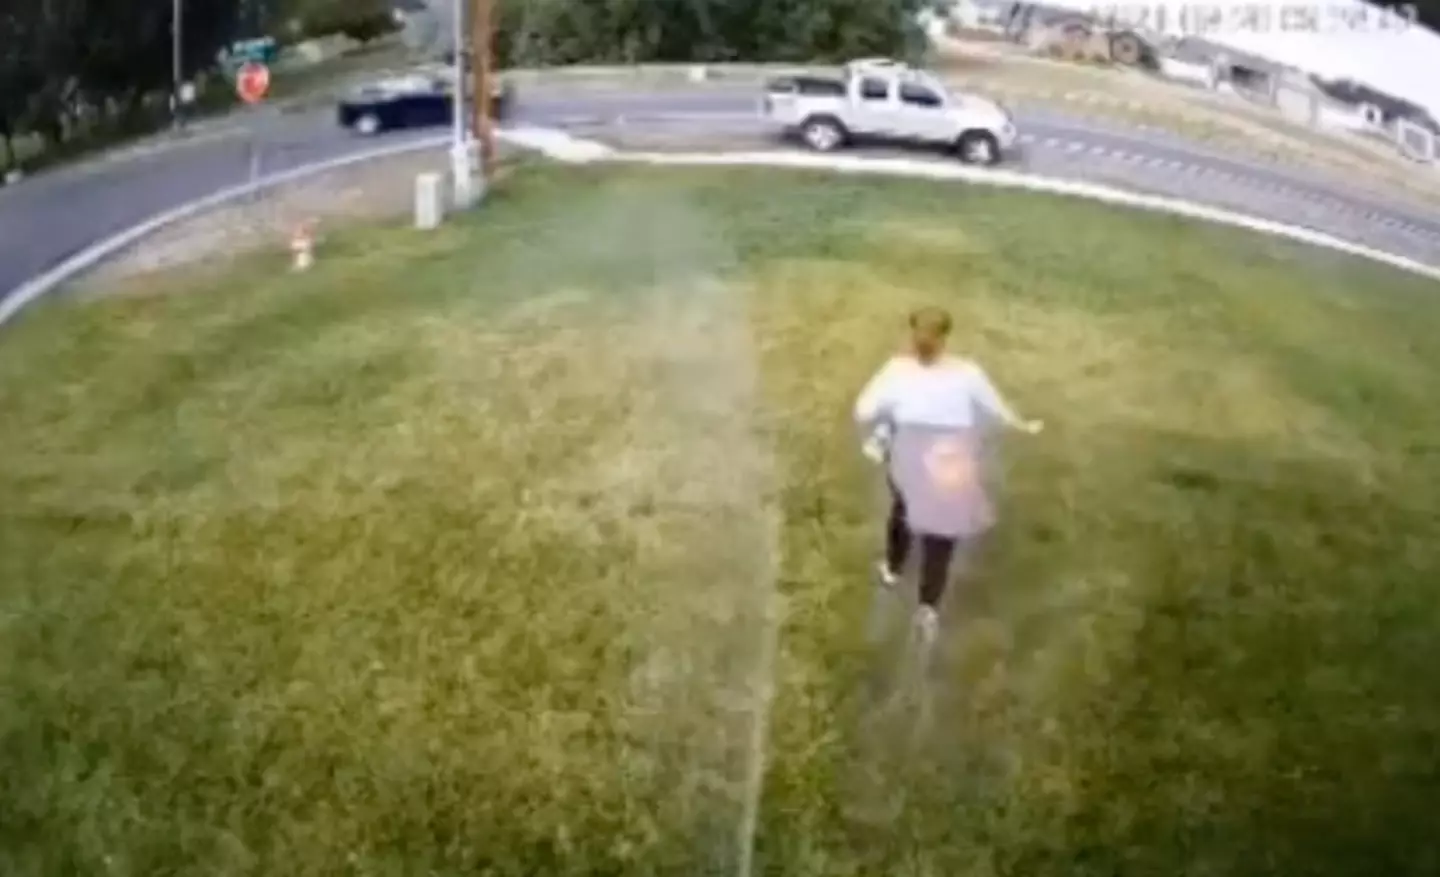 The homeowner sent people running with the sprinkler.